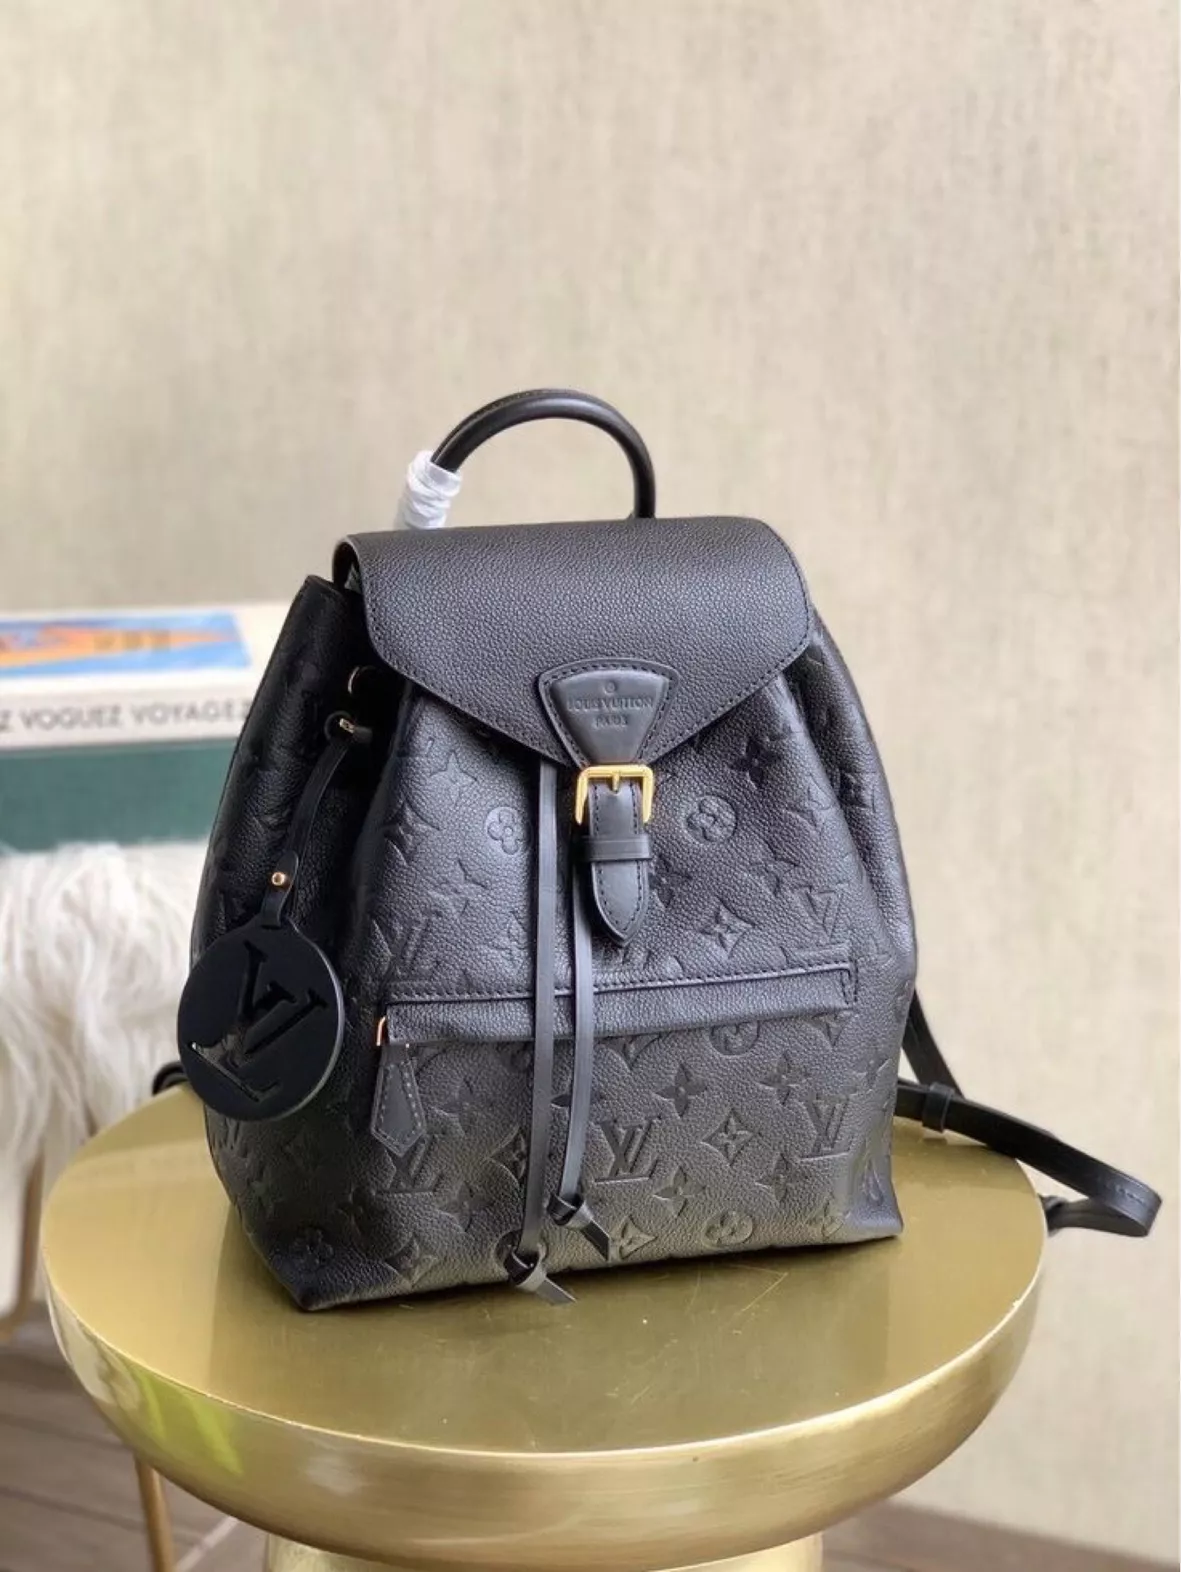 DHGATE LOUIS VUITTON BACKPACK UNBOXING AND REVIEW! 